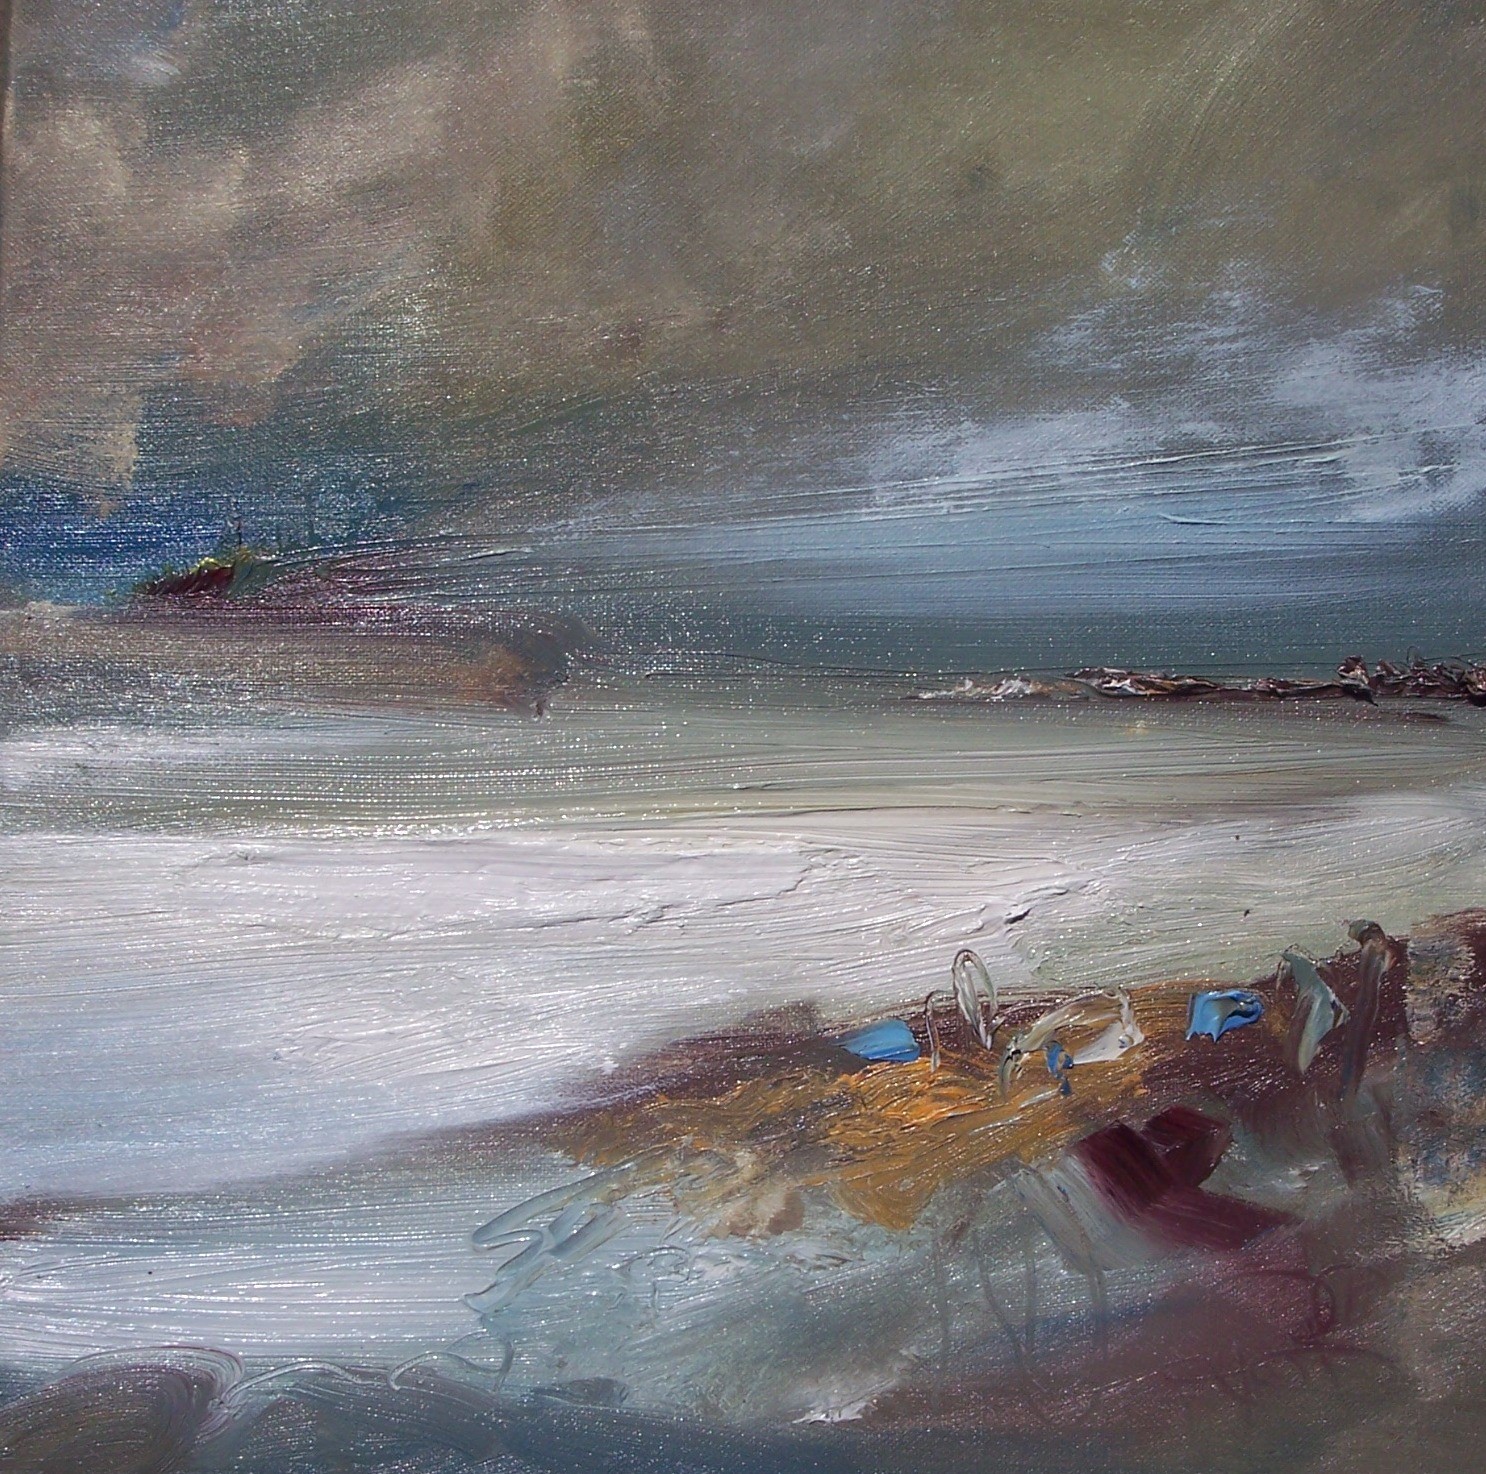 'In the midst of a storm' by artist Rosanne Barr